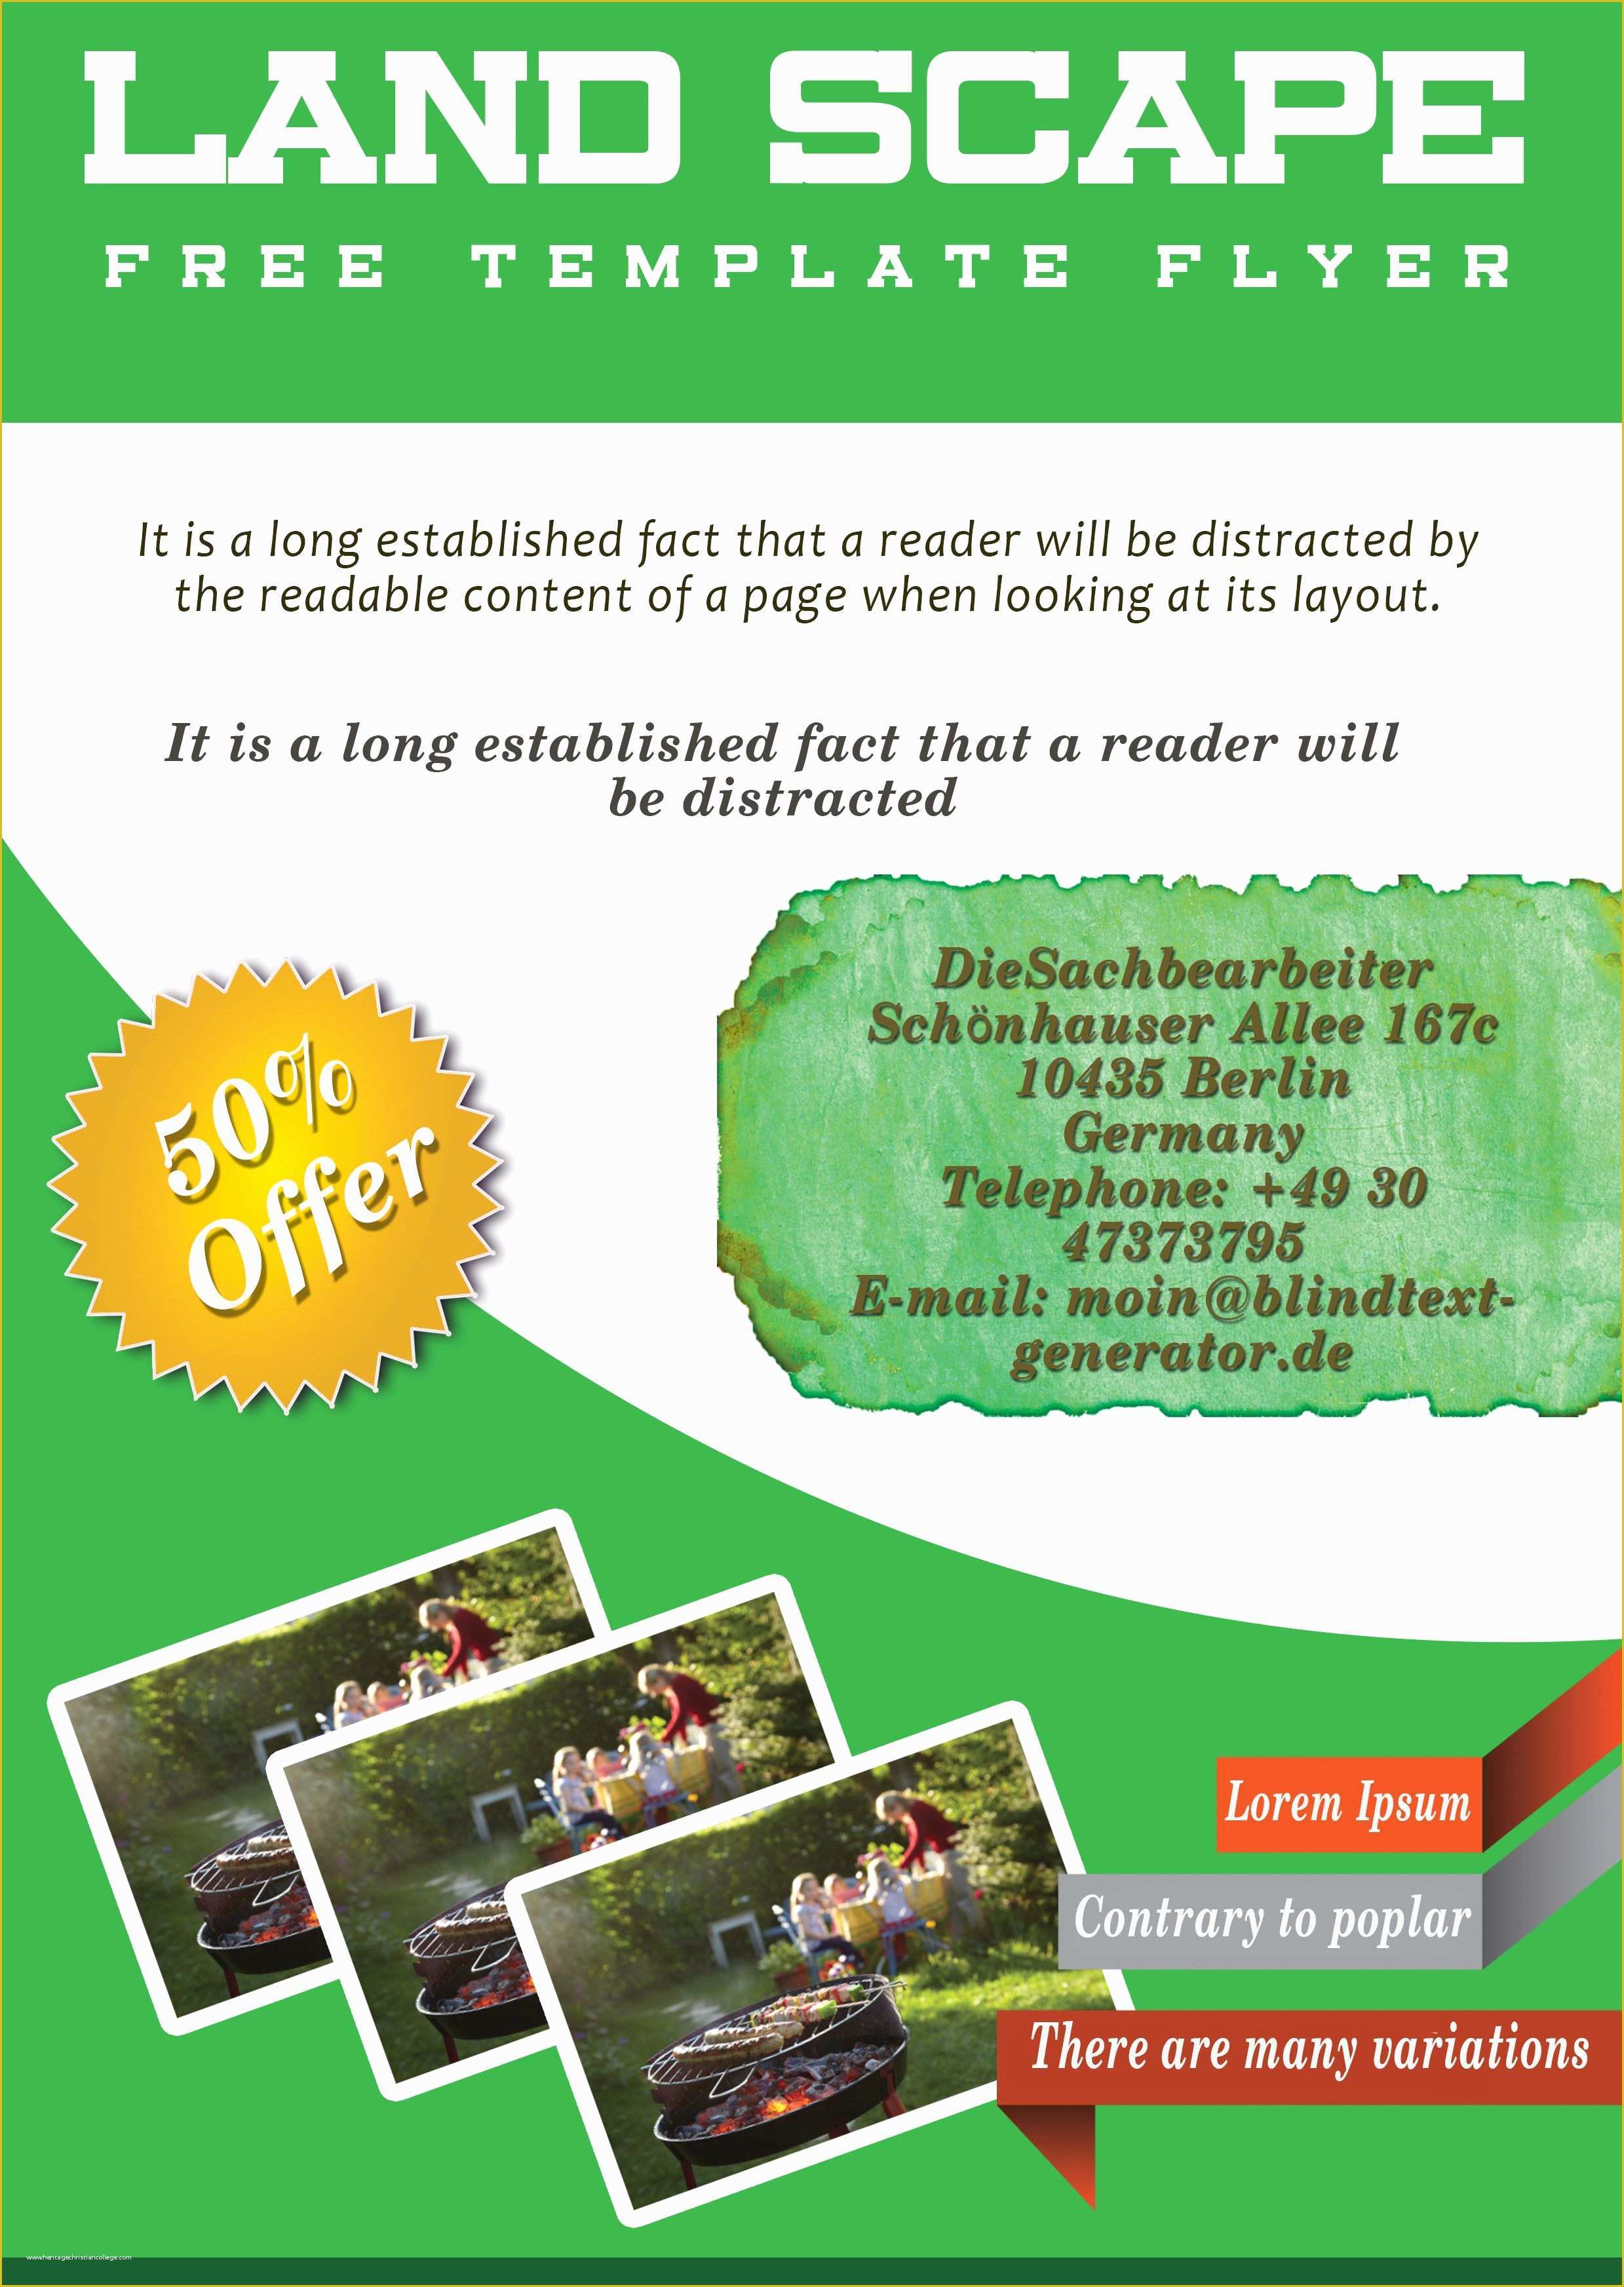 Advertisement Template Free Of Free Landscaping Flyer Templates to Power Lawn Care